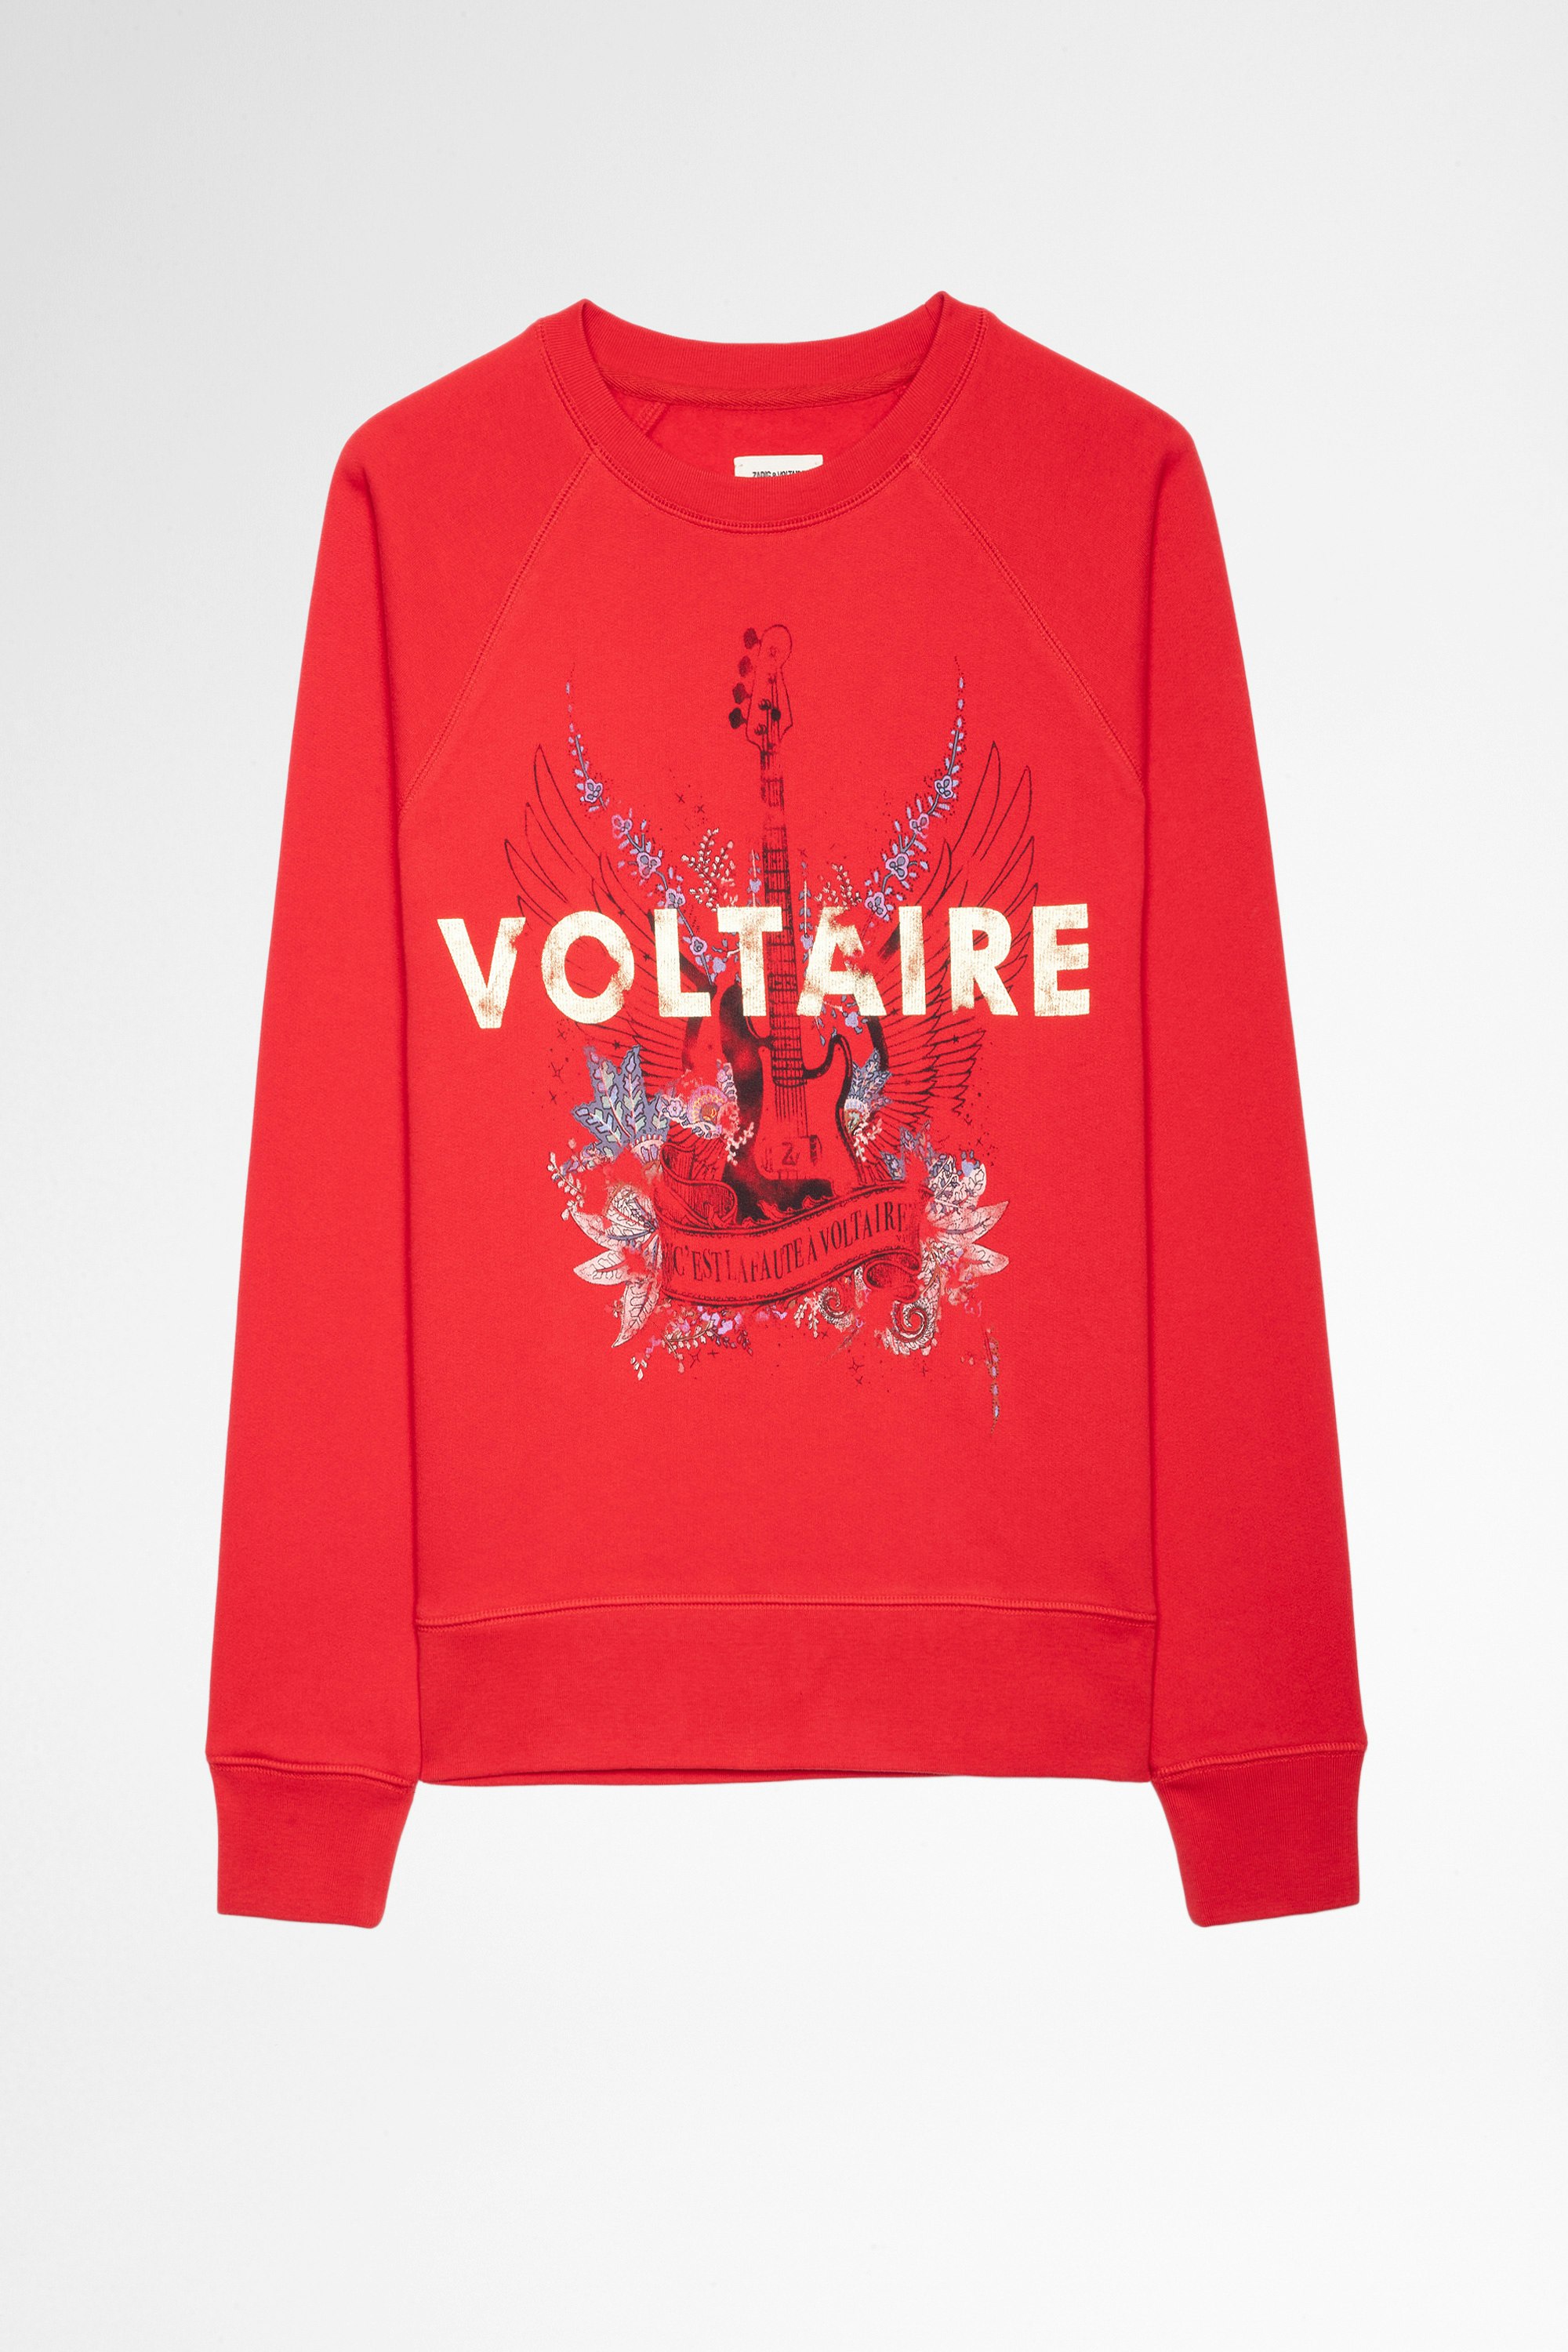 Upper Guitar Voltaire Sweatshirt Women's red cotton jumper with gold Voltaire and guitar print